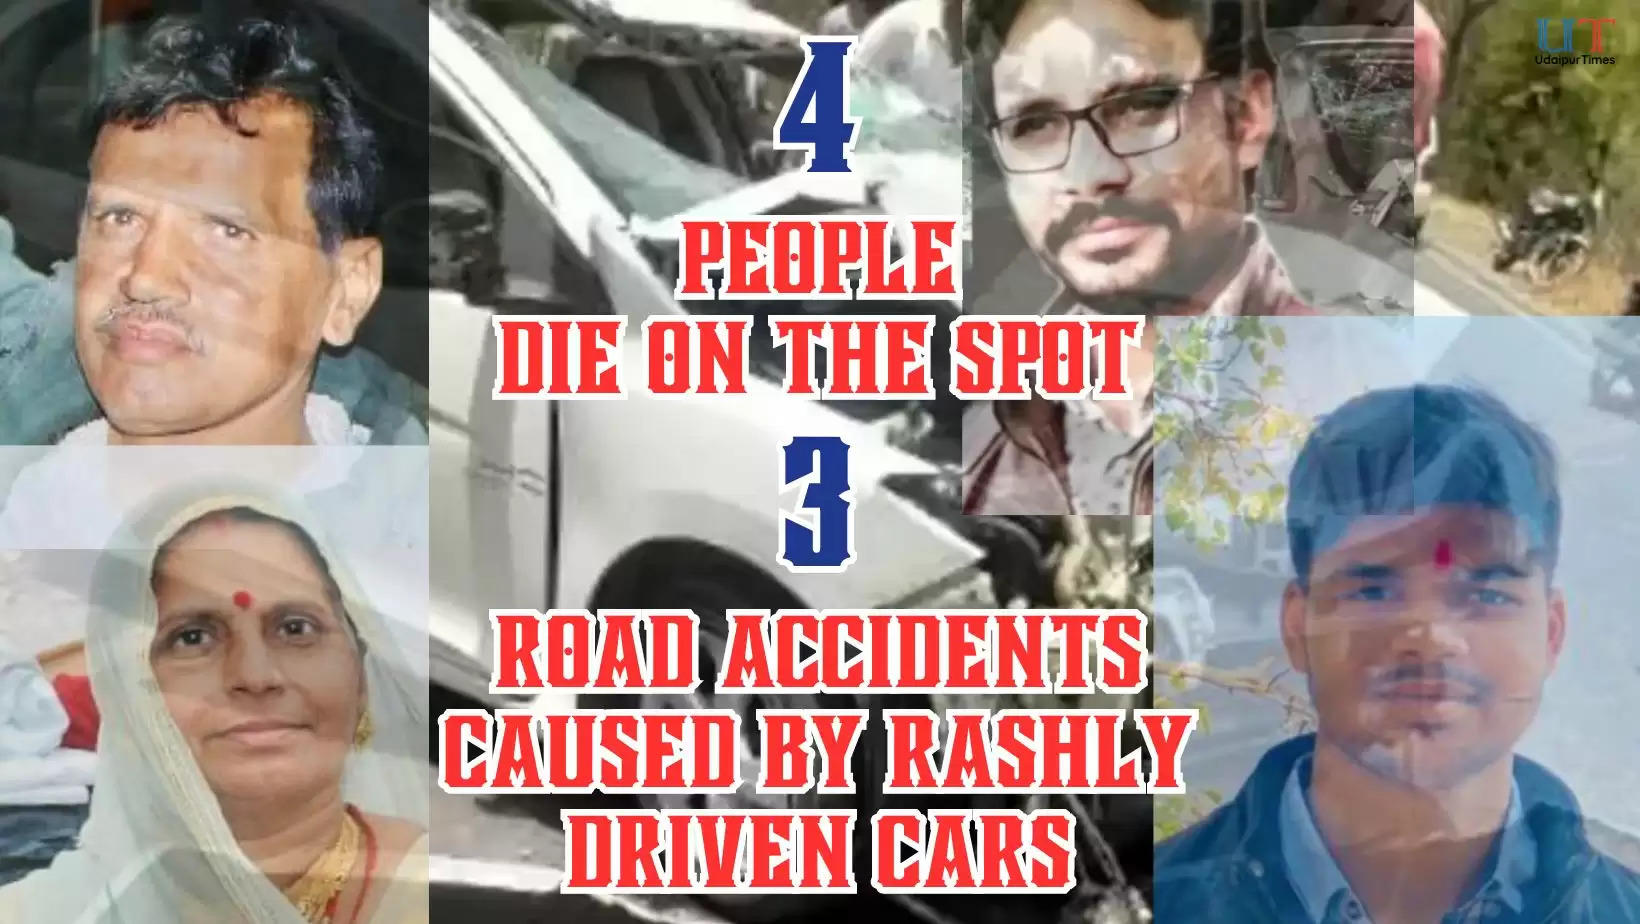 4 people killed in 3 road accidents in udaipur in 24 hours. Accidents were caused by rashly driven cars. All the three drivers have absconded